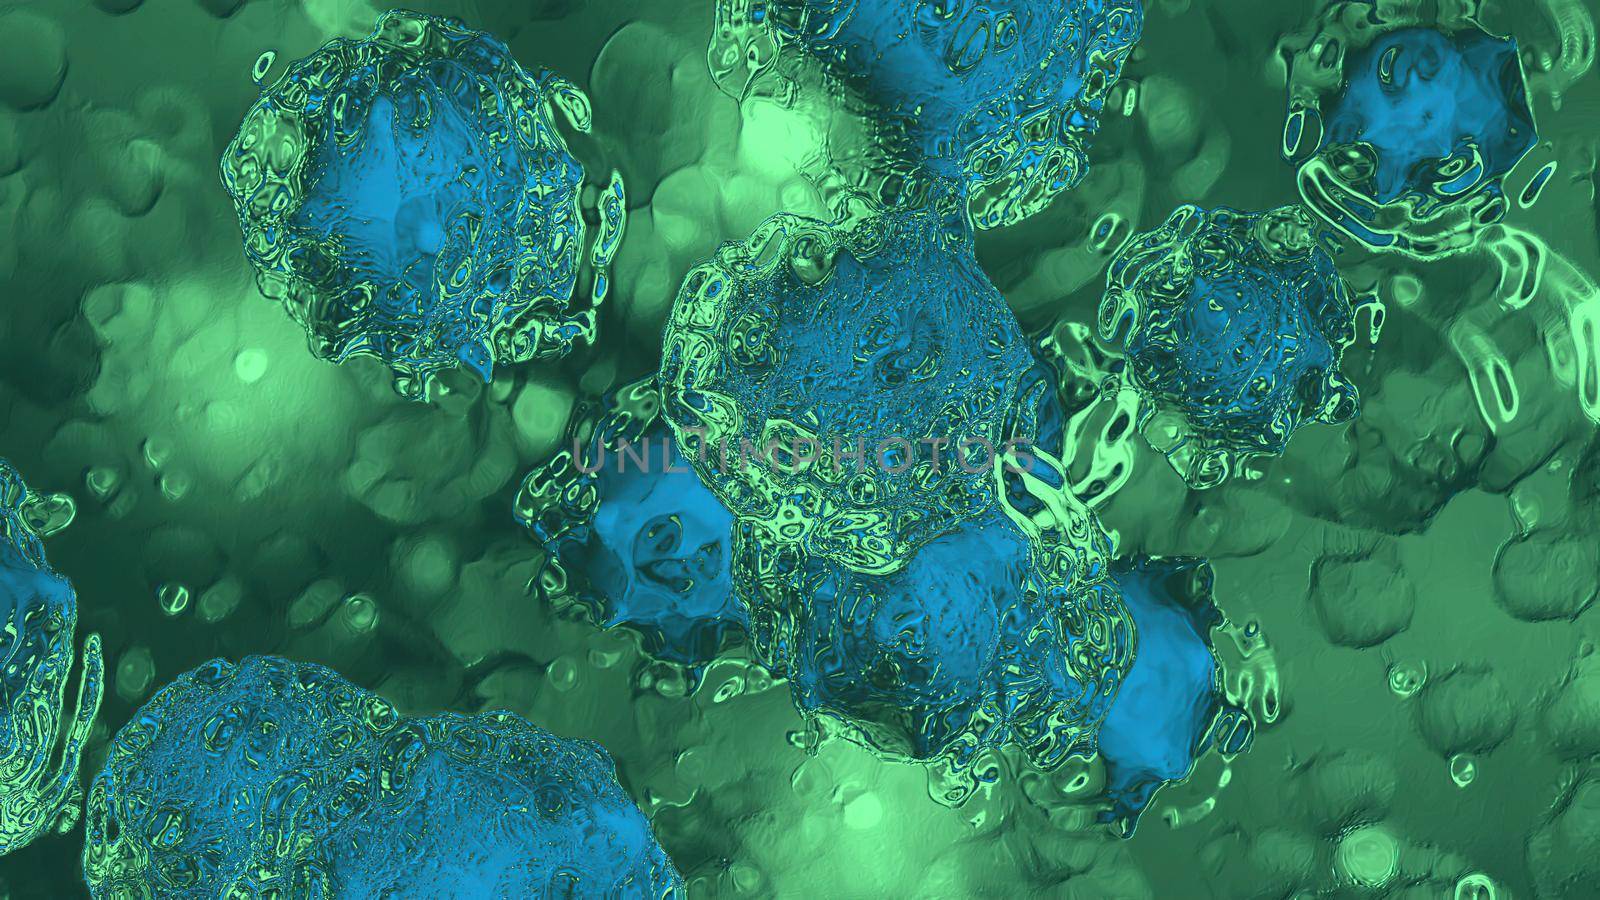 3d illustration -  Cancer Cell in frozen condition by vitanovski